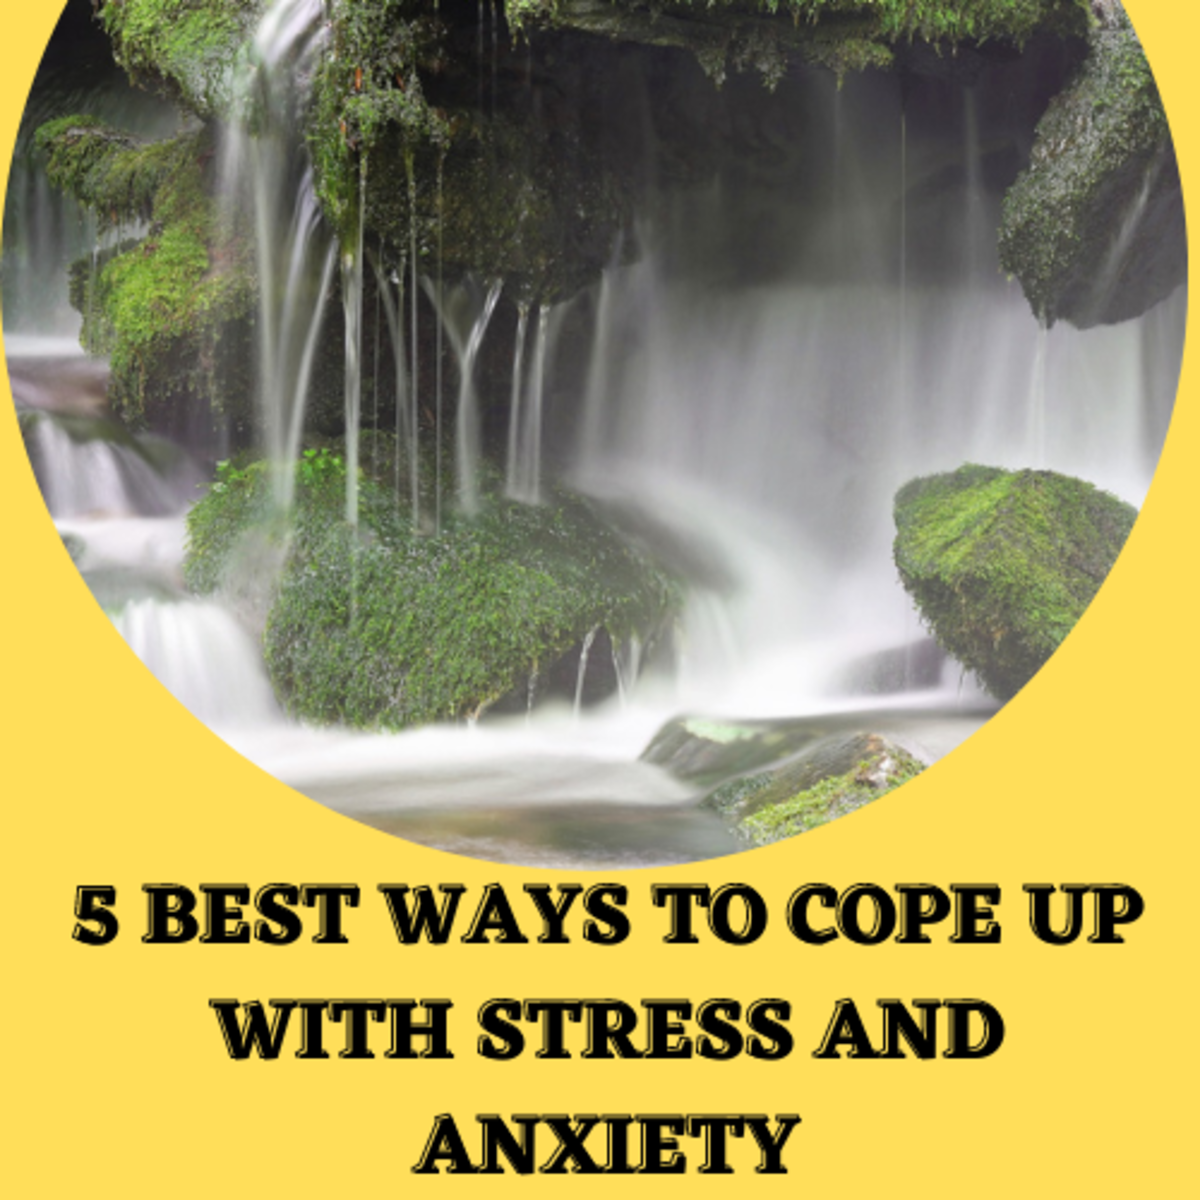 5-best-ways-to-cope-up-with-stress-and-anxiety